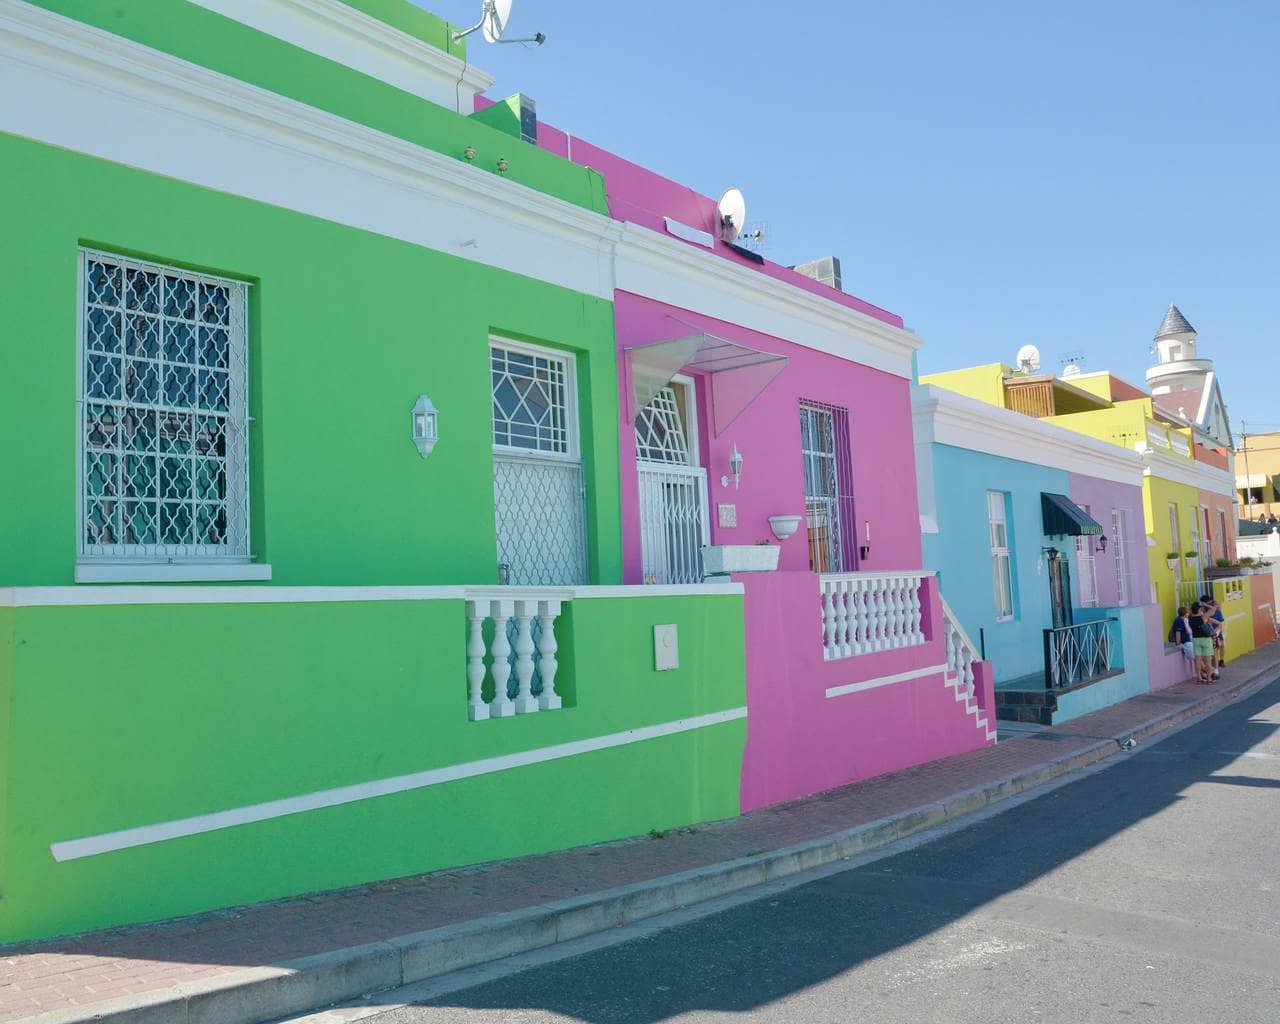 The iconic colourful houses that line the street of Bo Kaap